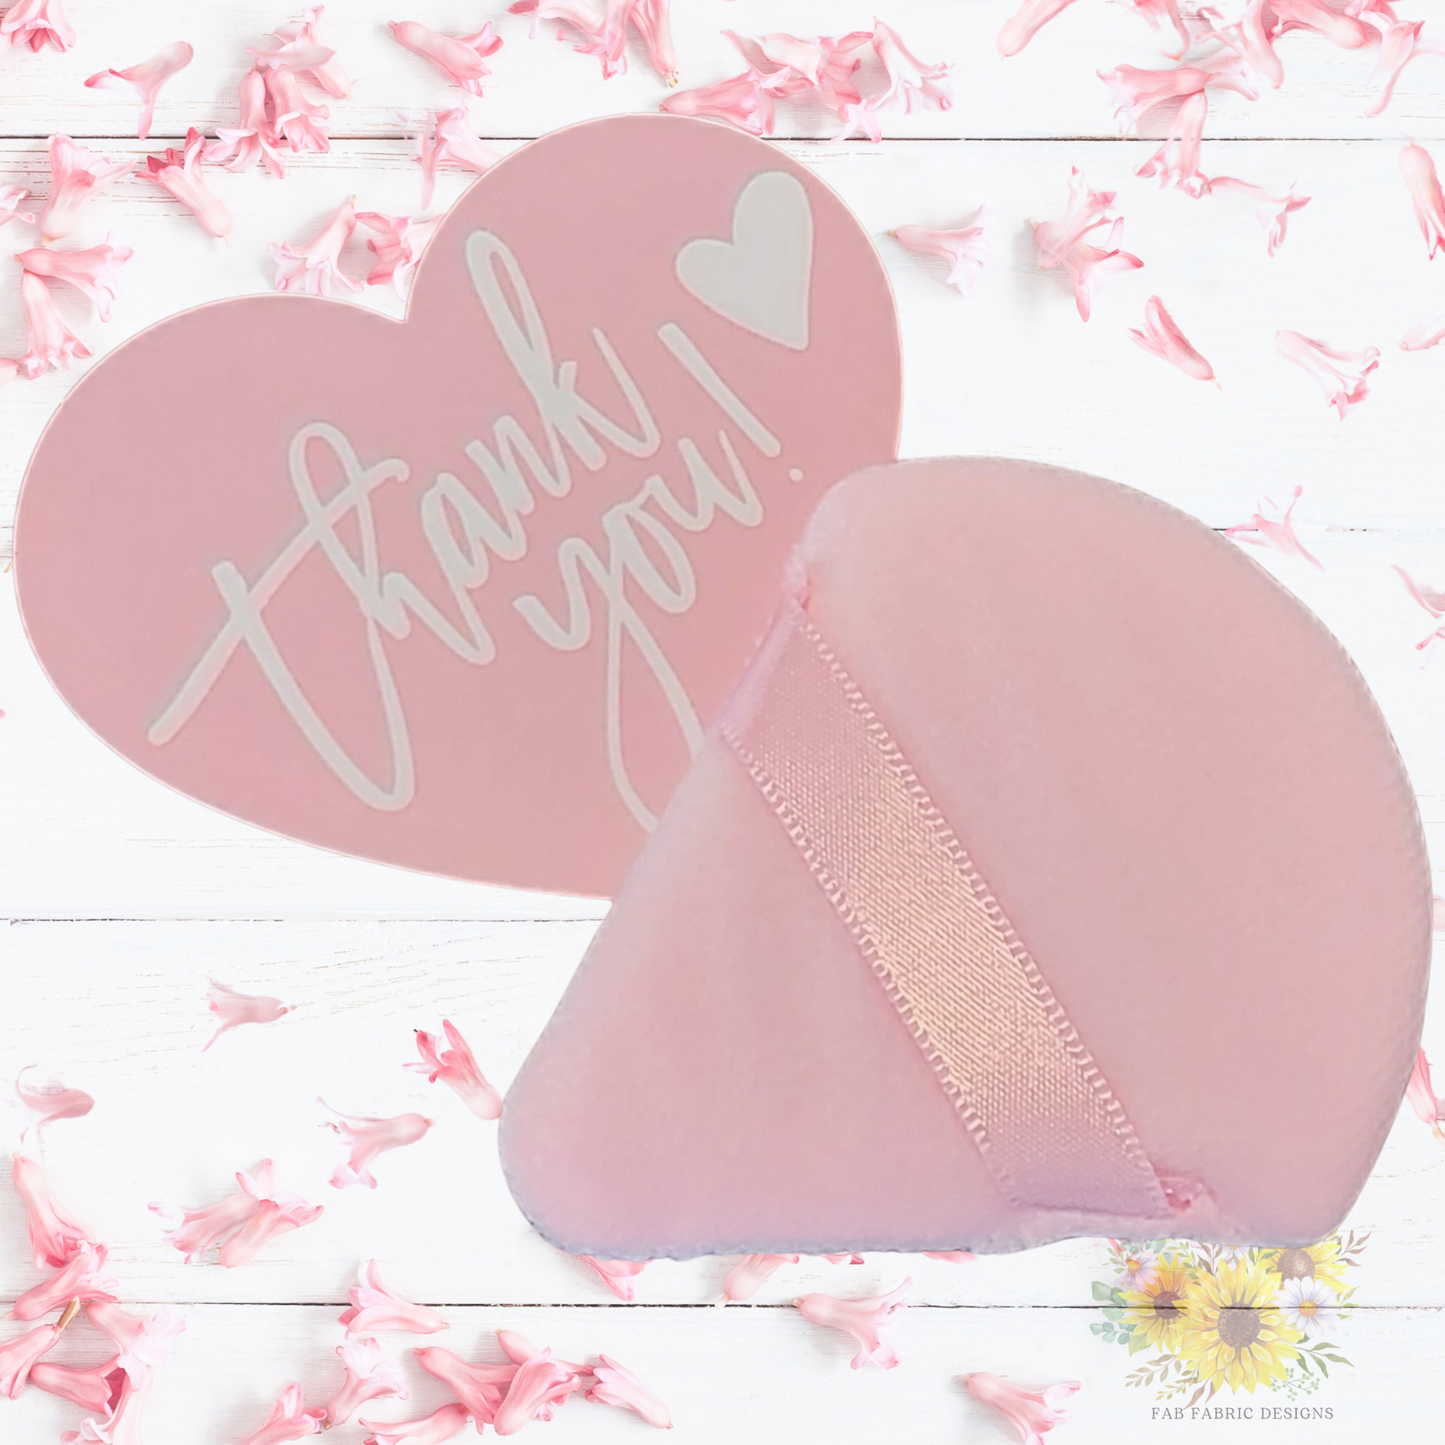 Thank You Heart Card with Pink Velvet Powder Puff